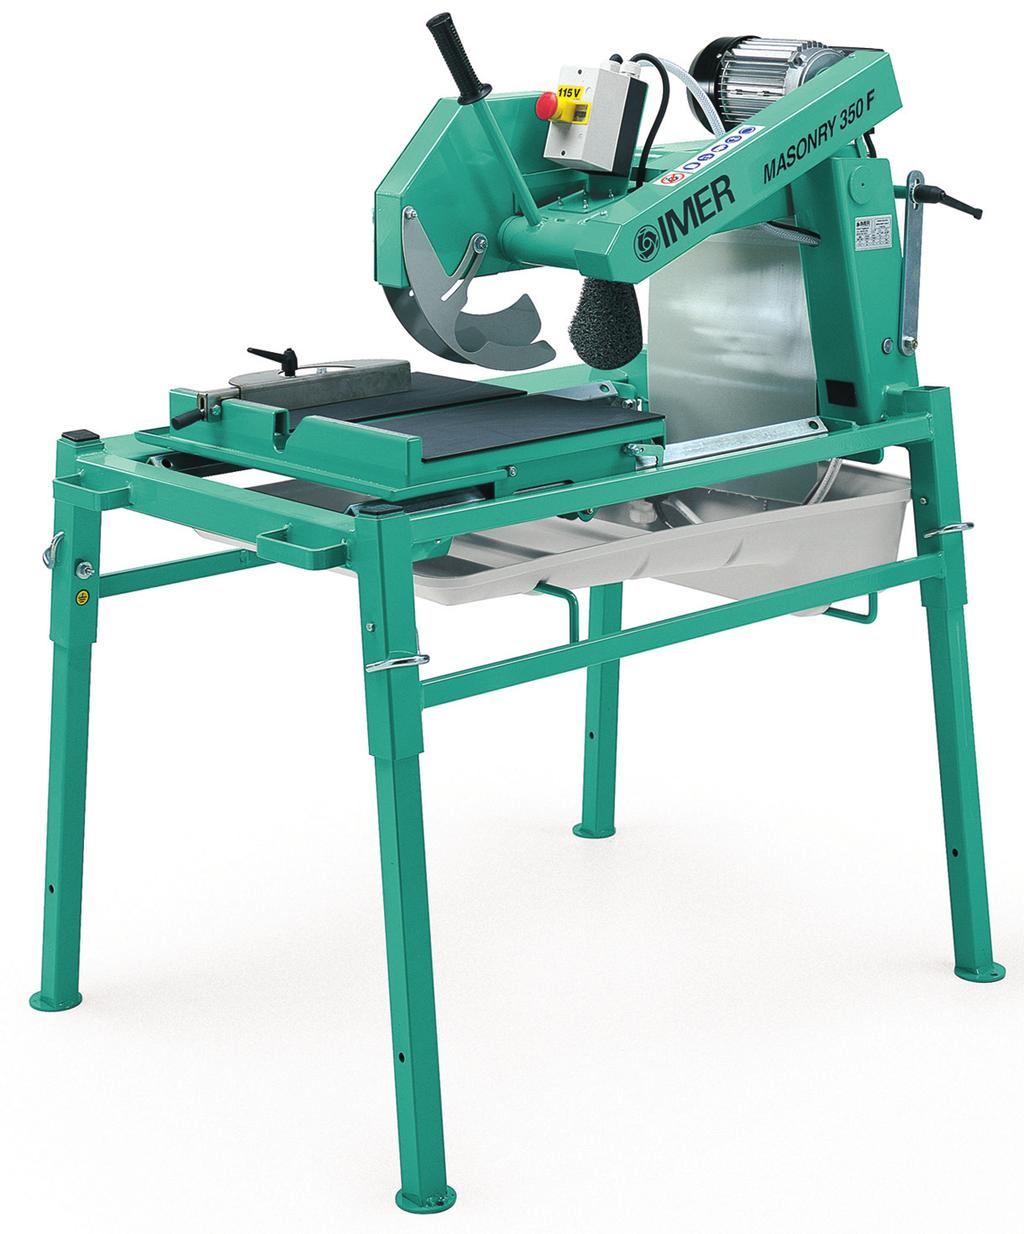 IMER MS 350 MASONRY SAWS Free shipping from IMER factory warehouse.* Plunge cut or locked head position on all models. 350SC - Head tilts to 45 degrees for miter cuts.